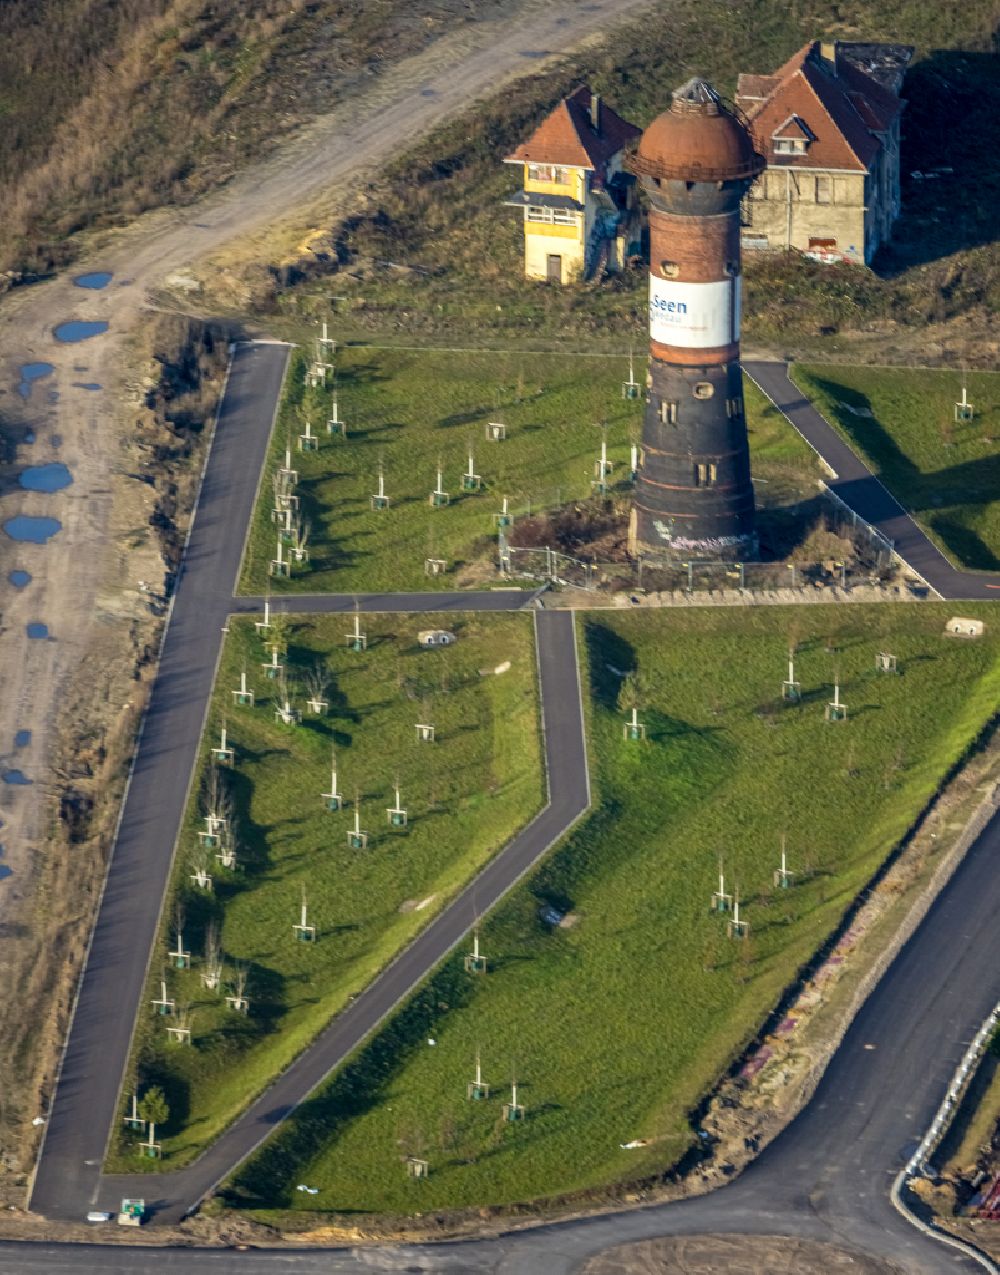 Aerial photograph Duisburg - Building of industrial monument water tower on Gelaende the formerly Rangierbahnhofes in the district Wedau in Duisburg at Ruhrgebiet in the state North Rhine-Westphalia, Germany